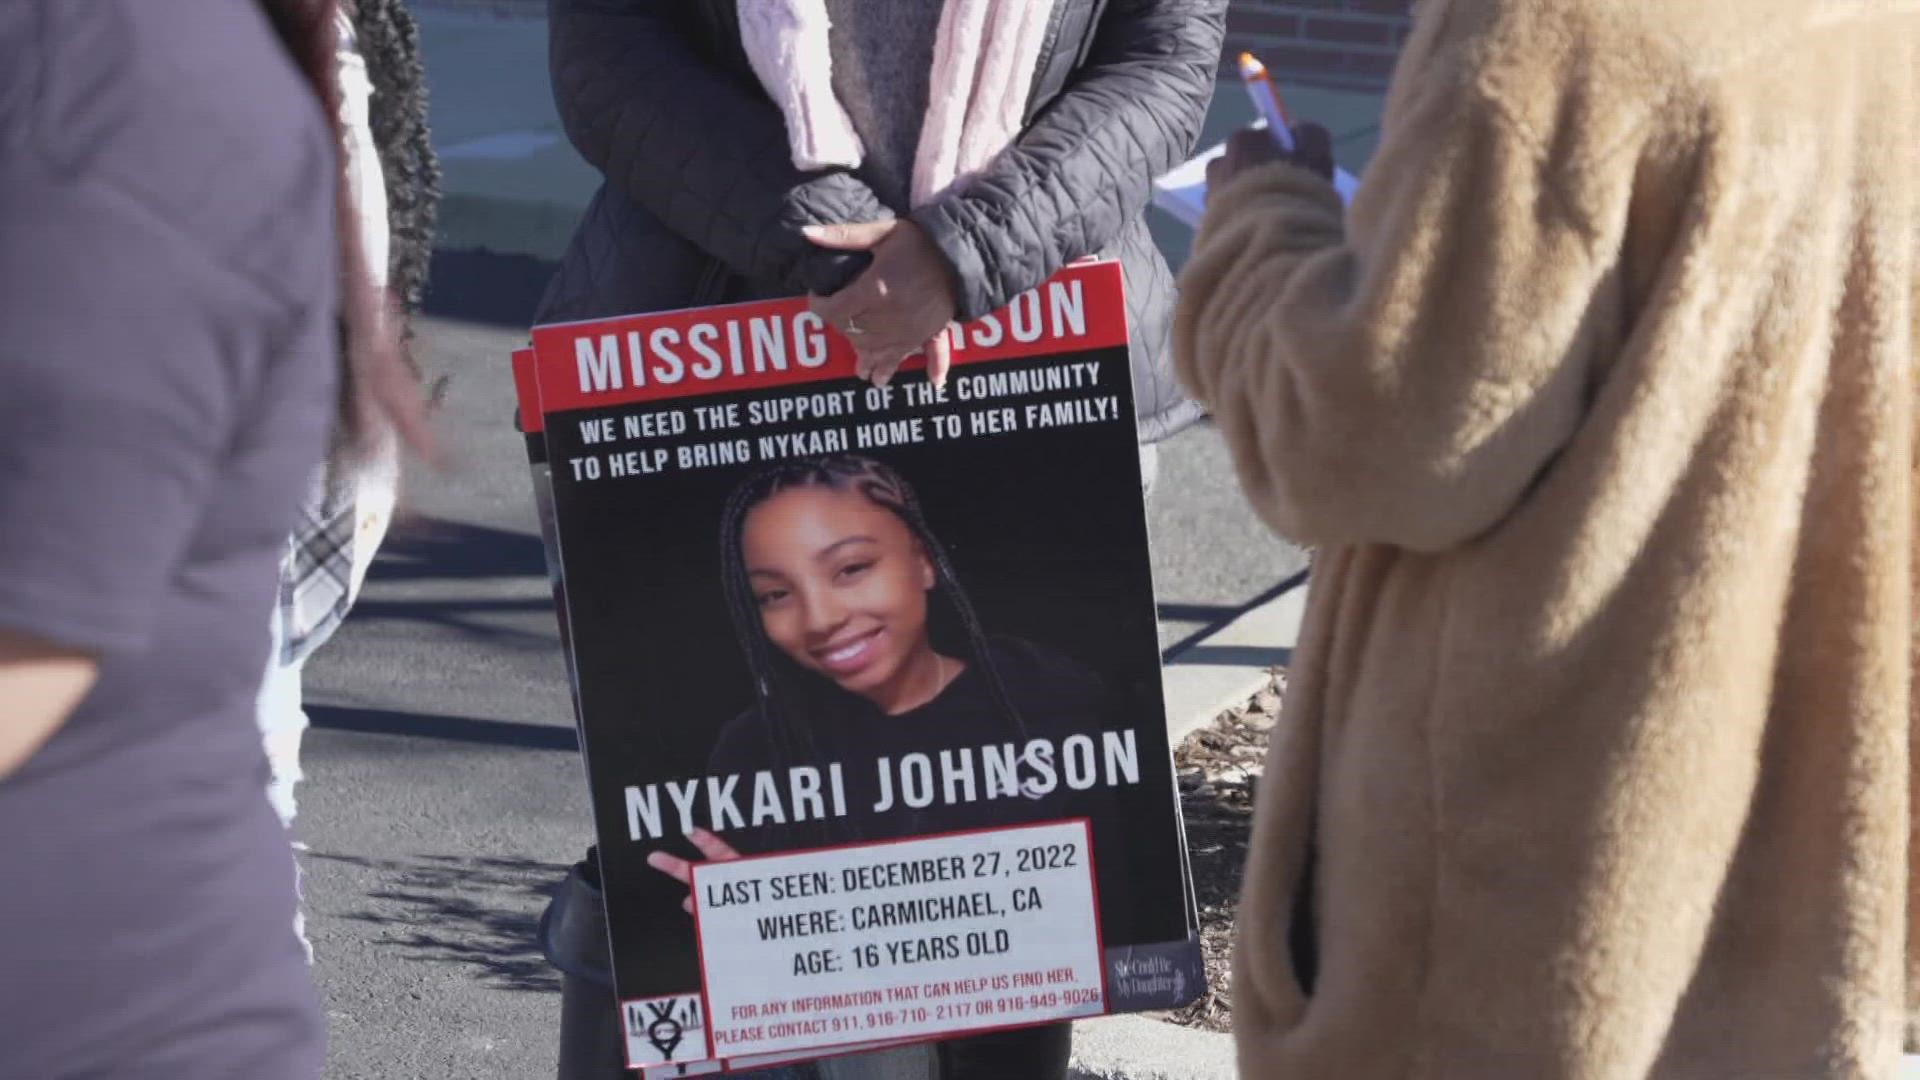 As 16-year-old Nykari Johnson has been missing for about a month, the family is pushing for law enforcement to help them search.